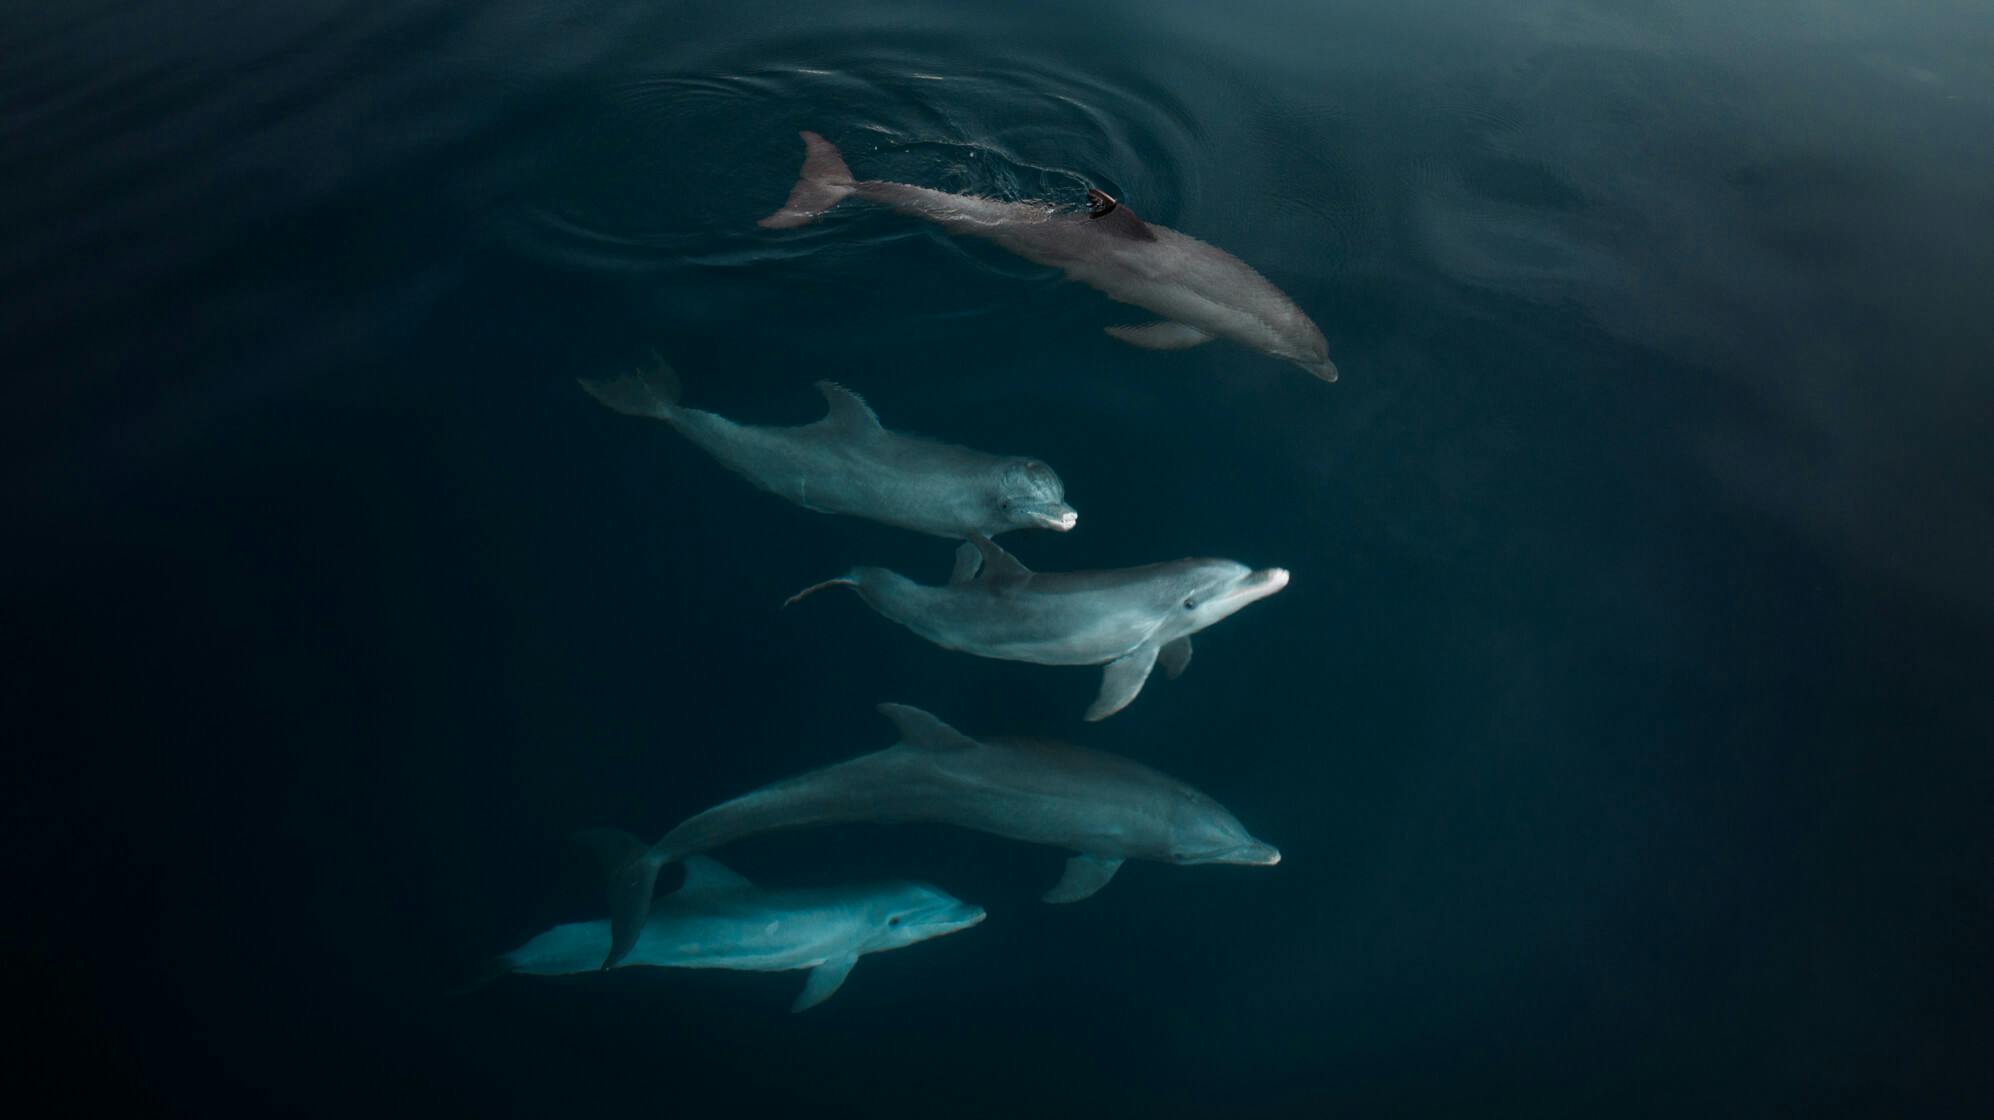 Dolphins (2021), by Paul Nicklen. Shot on Mavic 3